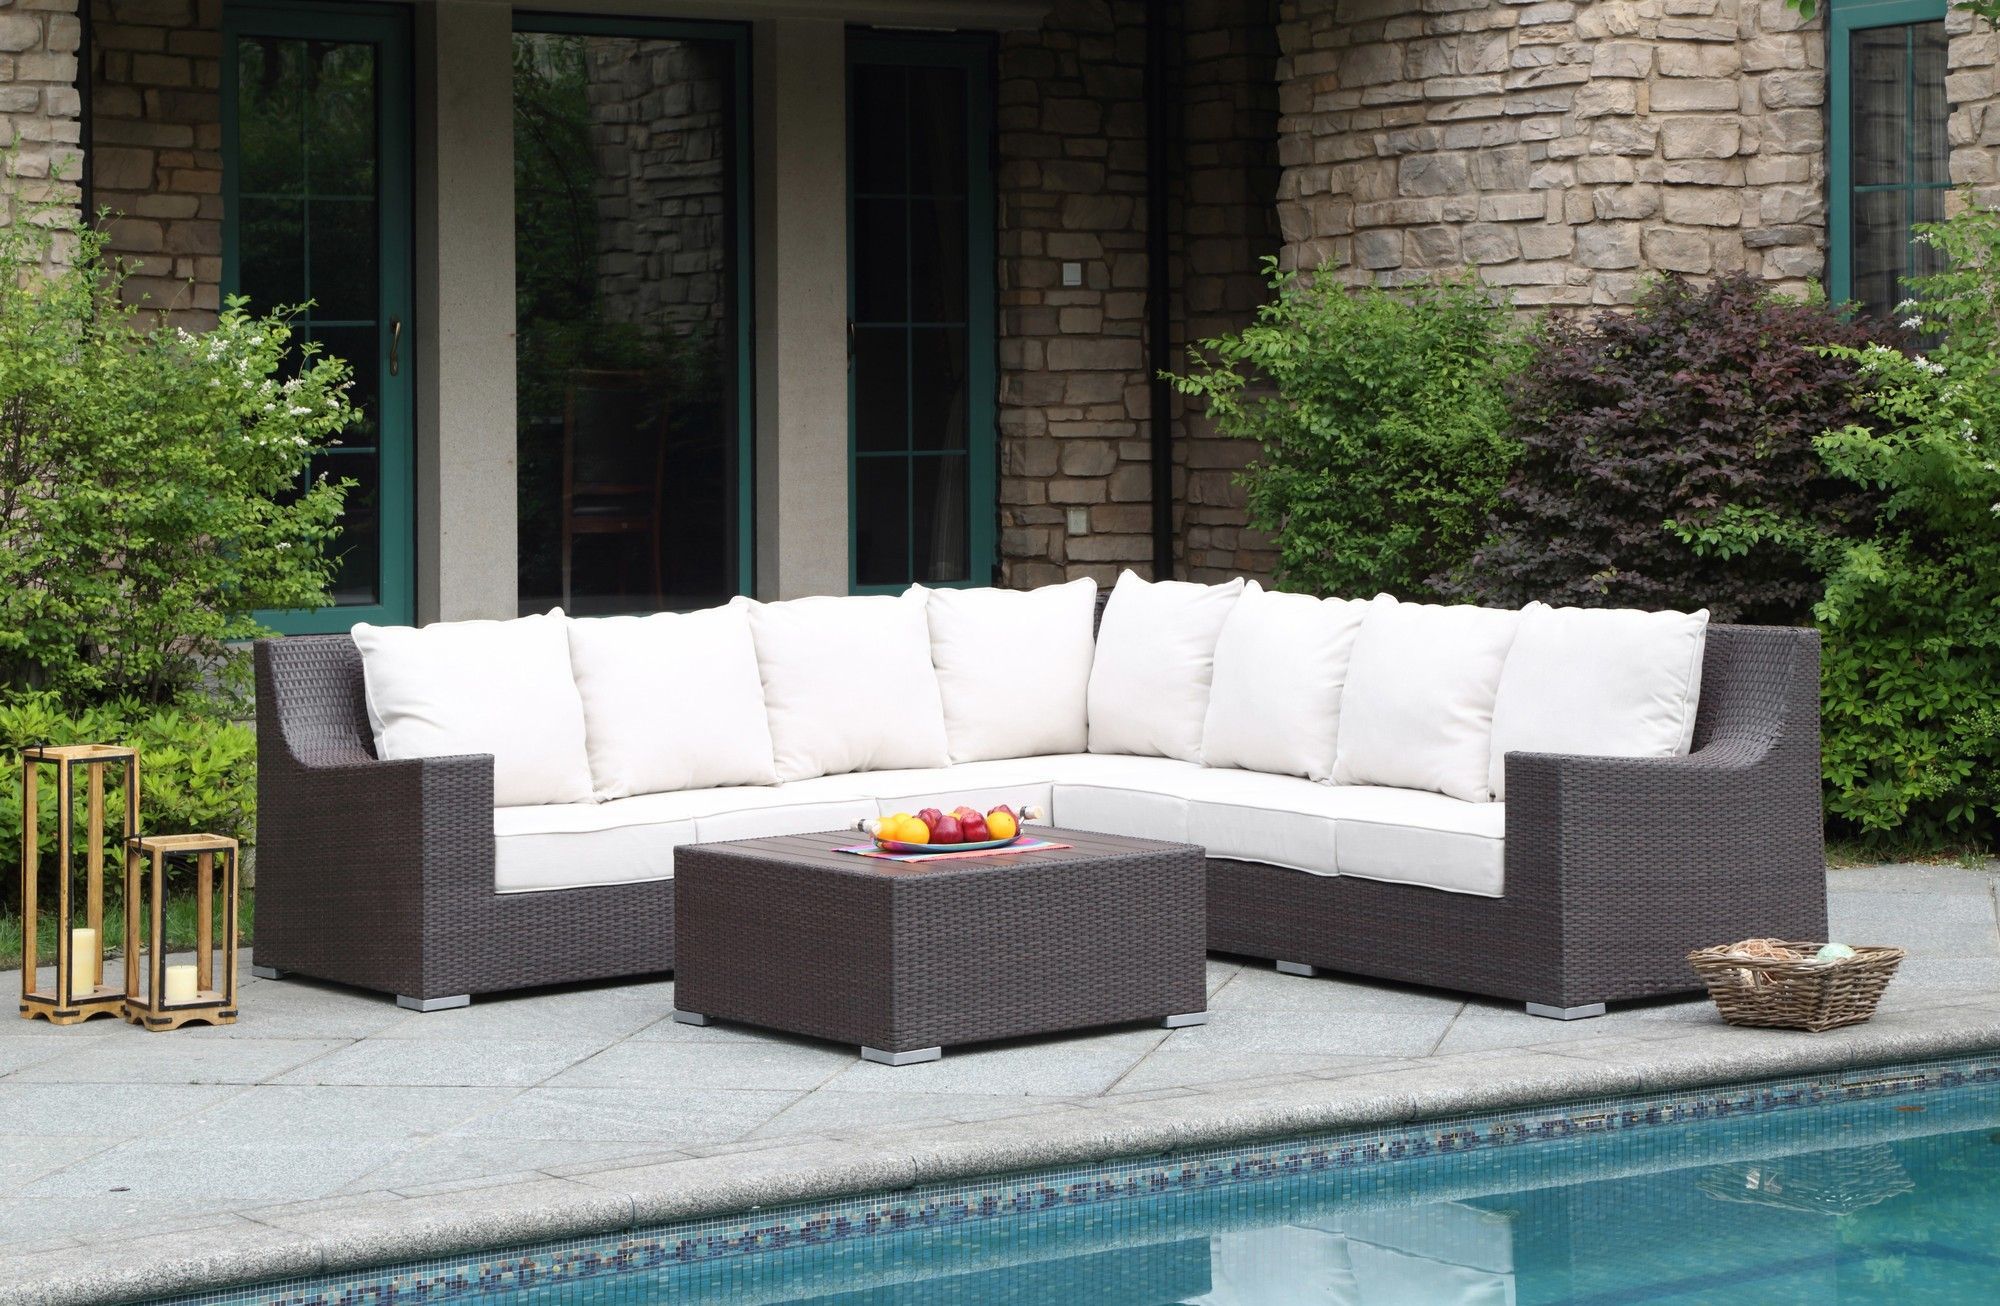 Panama 4 Piece Deep Seating Group | Outdoor Furniture Sets, Patio With Regard To 4 Piece Outdoor Seating Patio Sets (View 12 of 15)